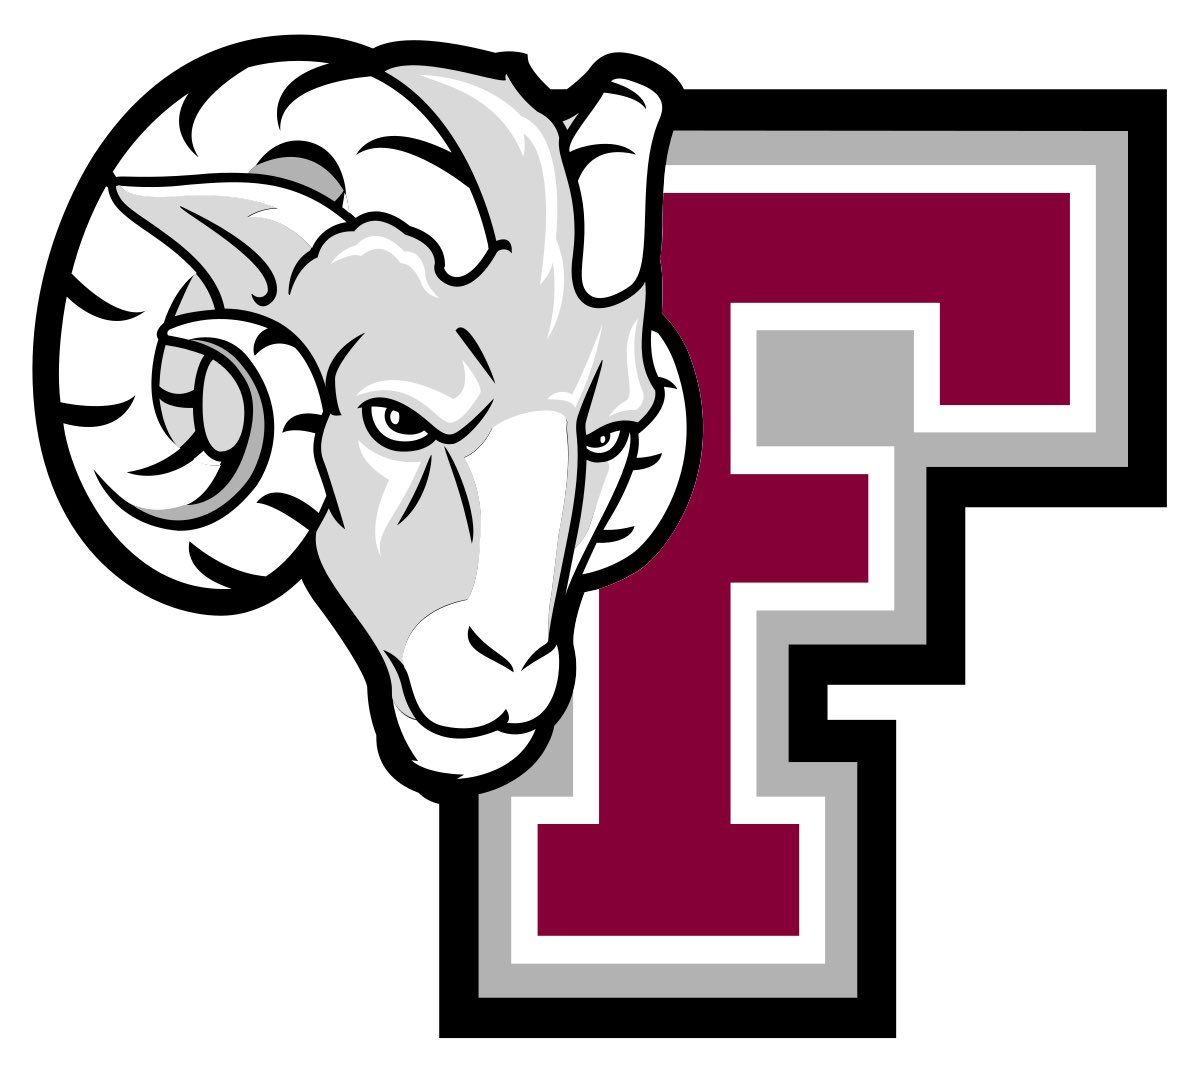 After a great conversation, I am Very blessed to receive an Football Scholarship to Fordham University✝️ @CoachLenahan @FORDHAMFOOTBALL @COACHJCLANCY @_Dugii @TexasXtreme7v7 @KCAINATHLETICS @KLEINCAINFB @Coach_Conlin